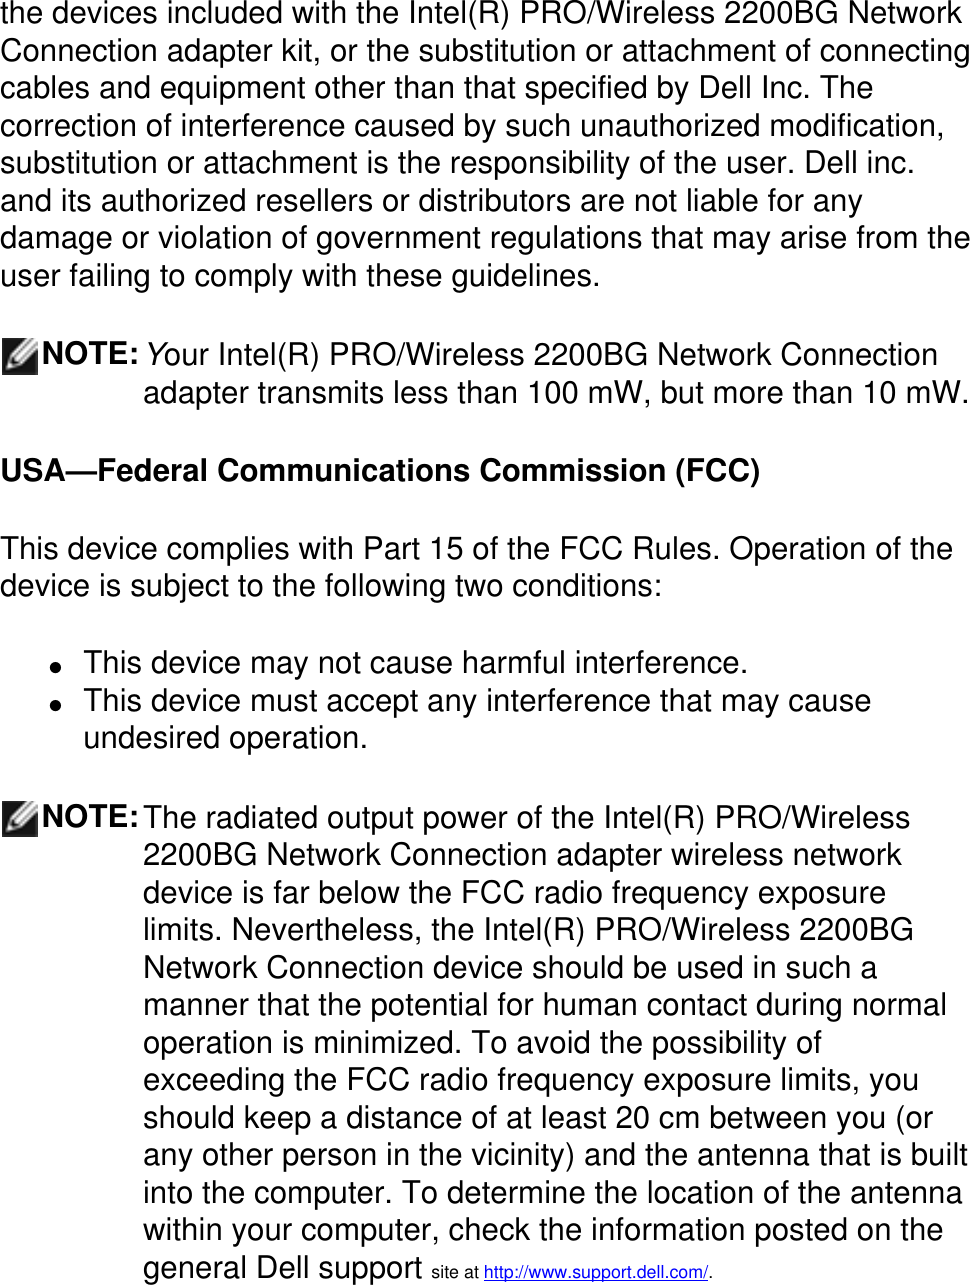 the devices included with the Intel(R) PRO/Wireless 2200BG Network Connection adapter kit, or the substitution or attachment of connecting cables and equipment other than that specified by Dell Inc. The correction of interference caused by such unauthorized modification, substitution or attachment is the responsibility of the user. Dell inc. and its authorized resellers or distributors are not liable for any damage or violation of government regulations that may arise from the user failing to comply with these guidelines.NOTE:Your Intel(R) PRO/Wireless 2200BG Network Connection adapter transmits less than 100 mW, but more than 10 mW.USA—Federal Communications Commission (FCC)This device complies with Part 15 of the FCC Rules. Operation of the device is subject to the following two conditions:●     This device may not cause harmful interference. ●     This device must accept any interference that may cause undesired operation.NOTE:The radiated output power of the Intel(R) PRO/Wireless 2200BG Network Connection adapter wireless network device is far below the FCC radio frequency exposure limits. Nevertheless, the Intel(R) PRO/Wireless 2200BG Network Connection device should be used in such a manner that the potential for human contact during normal operation is minimized. To avoid the possibility of exceeding the FCC radio frequency exposure limits, you should keep a distance of at least 20 cm between you (or any other person in the vicinity) and the antenna that is built into the computer. To determine the location of the antenna within your computer, check the information posted on the general Dell support site at http://www.support.dell.com/.